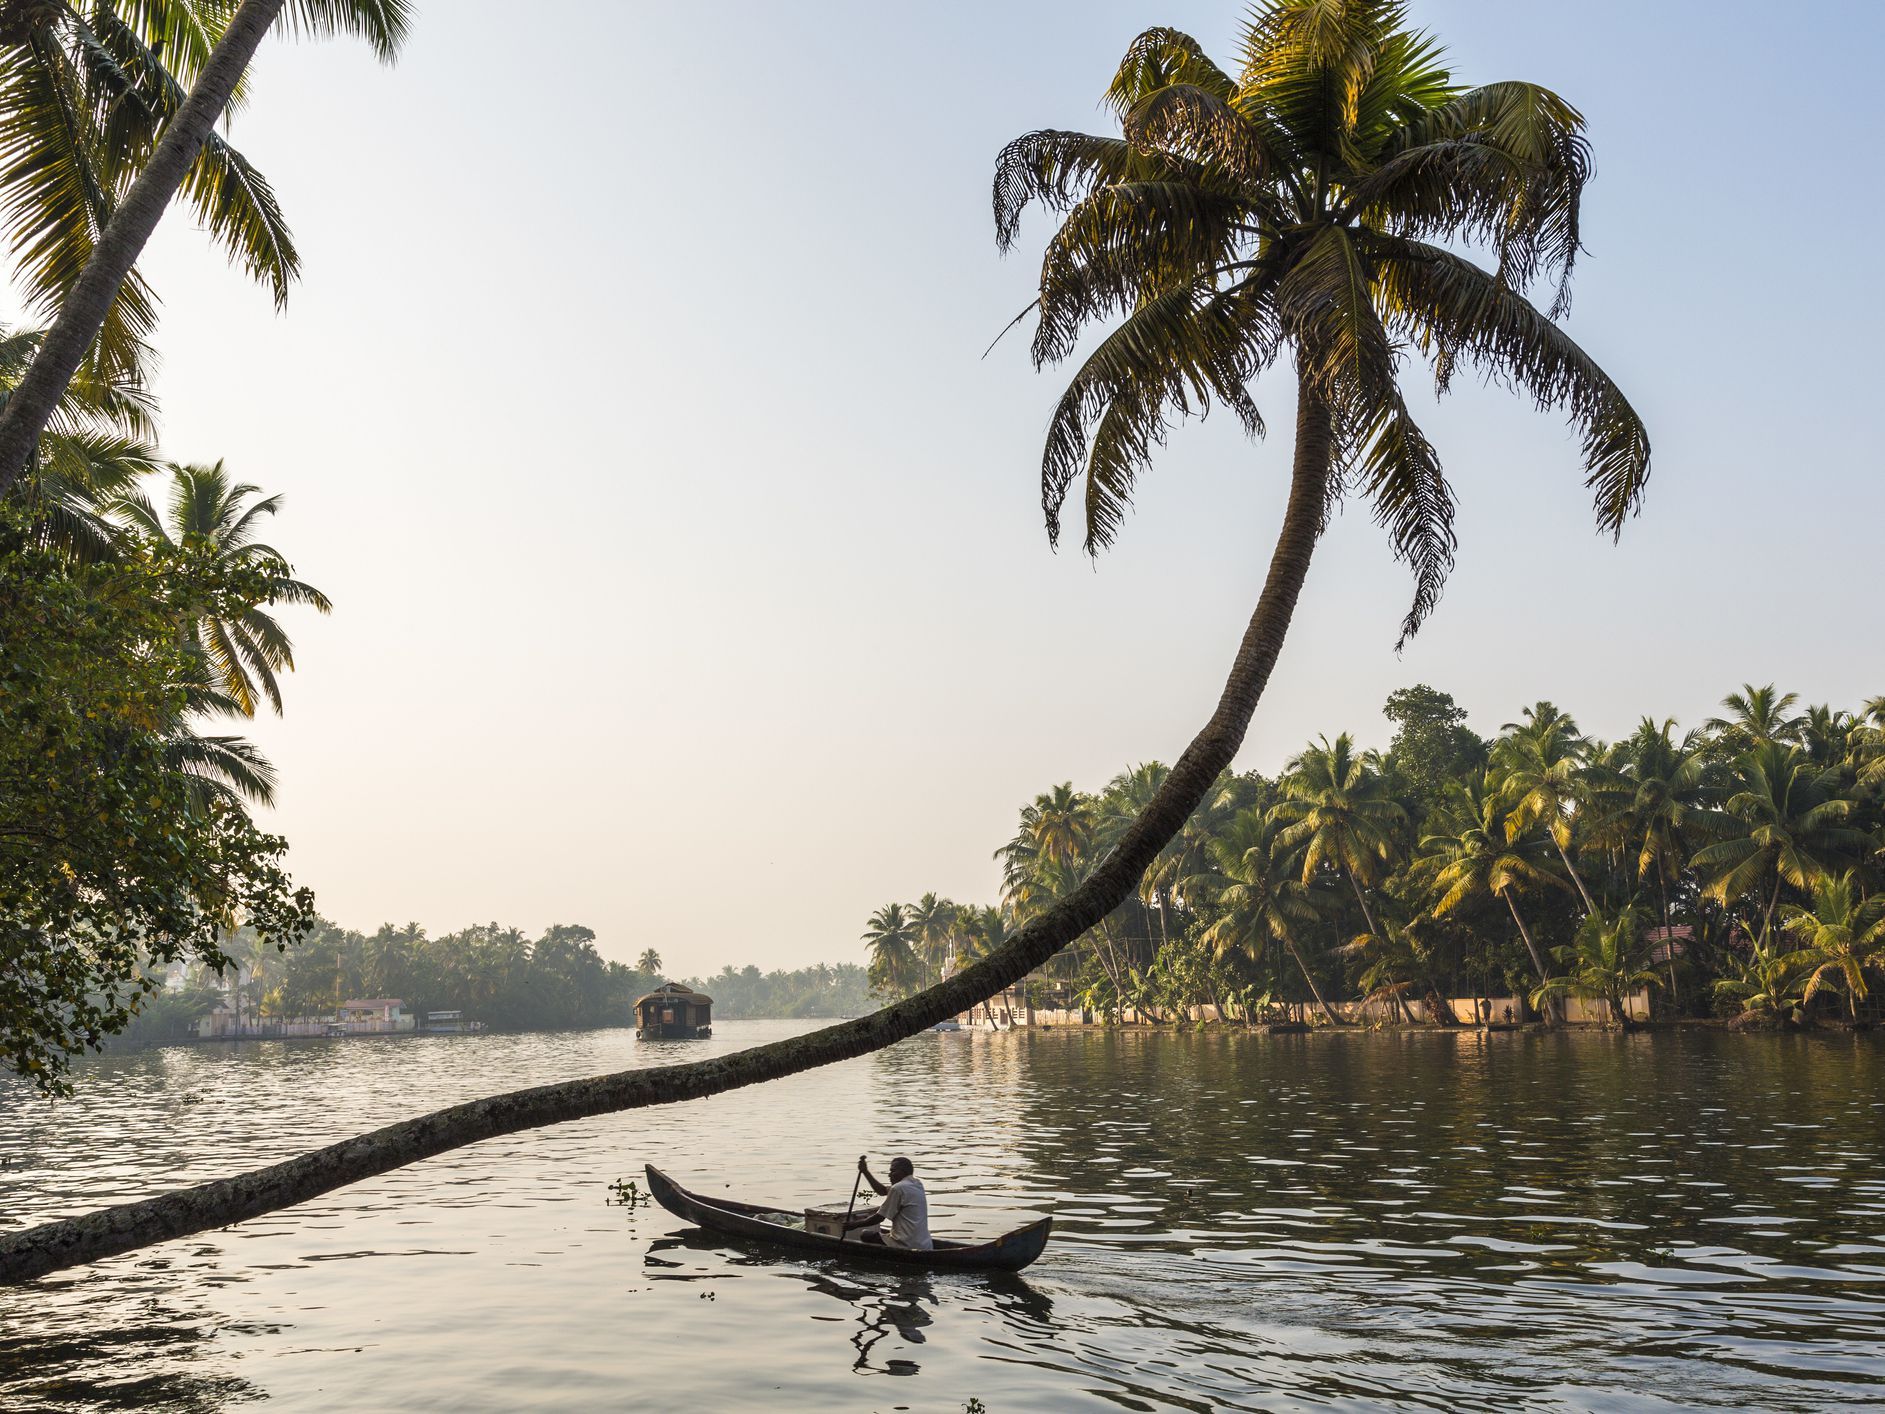 Dreamy Photo of Kerala's Backwaters Attractions